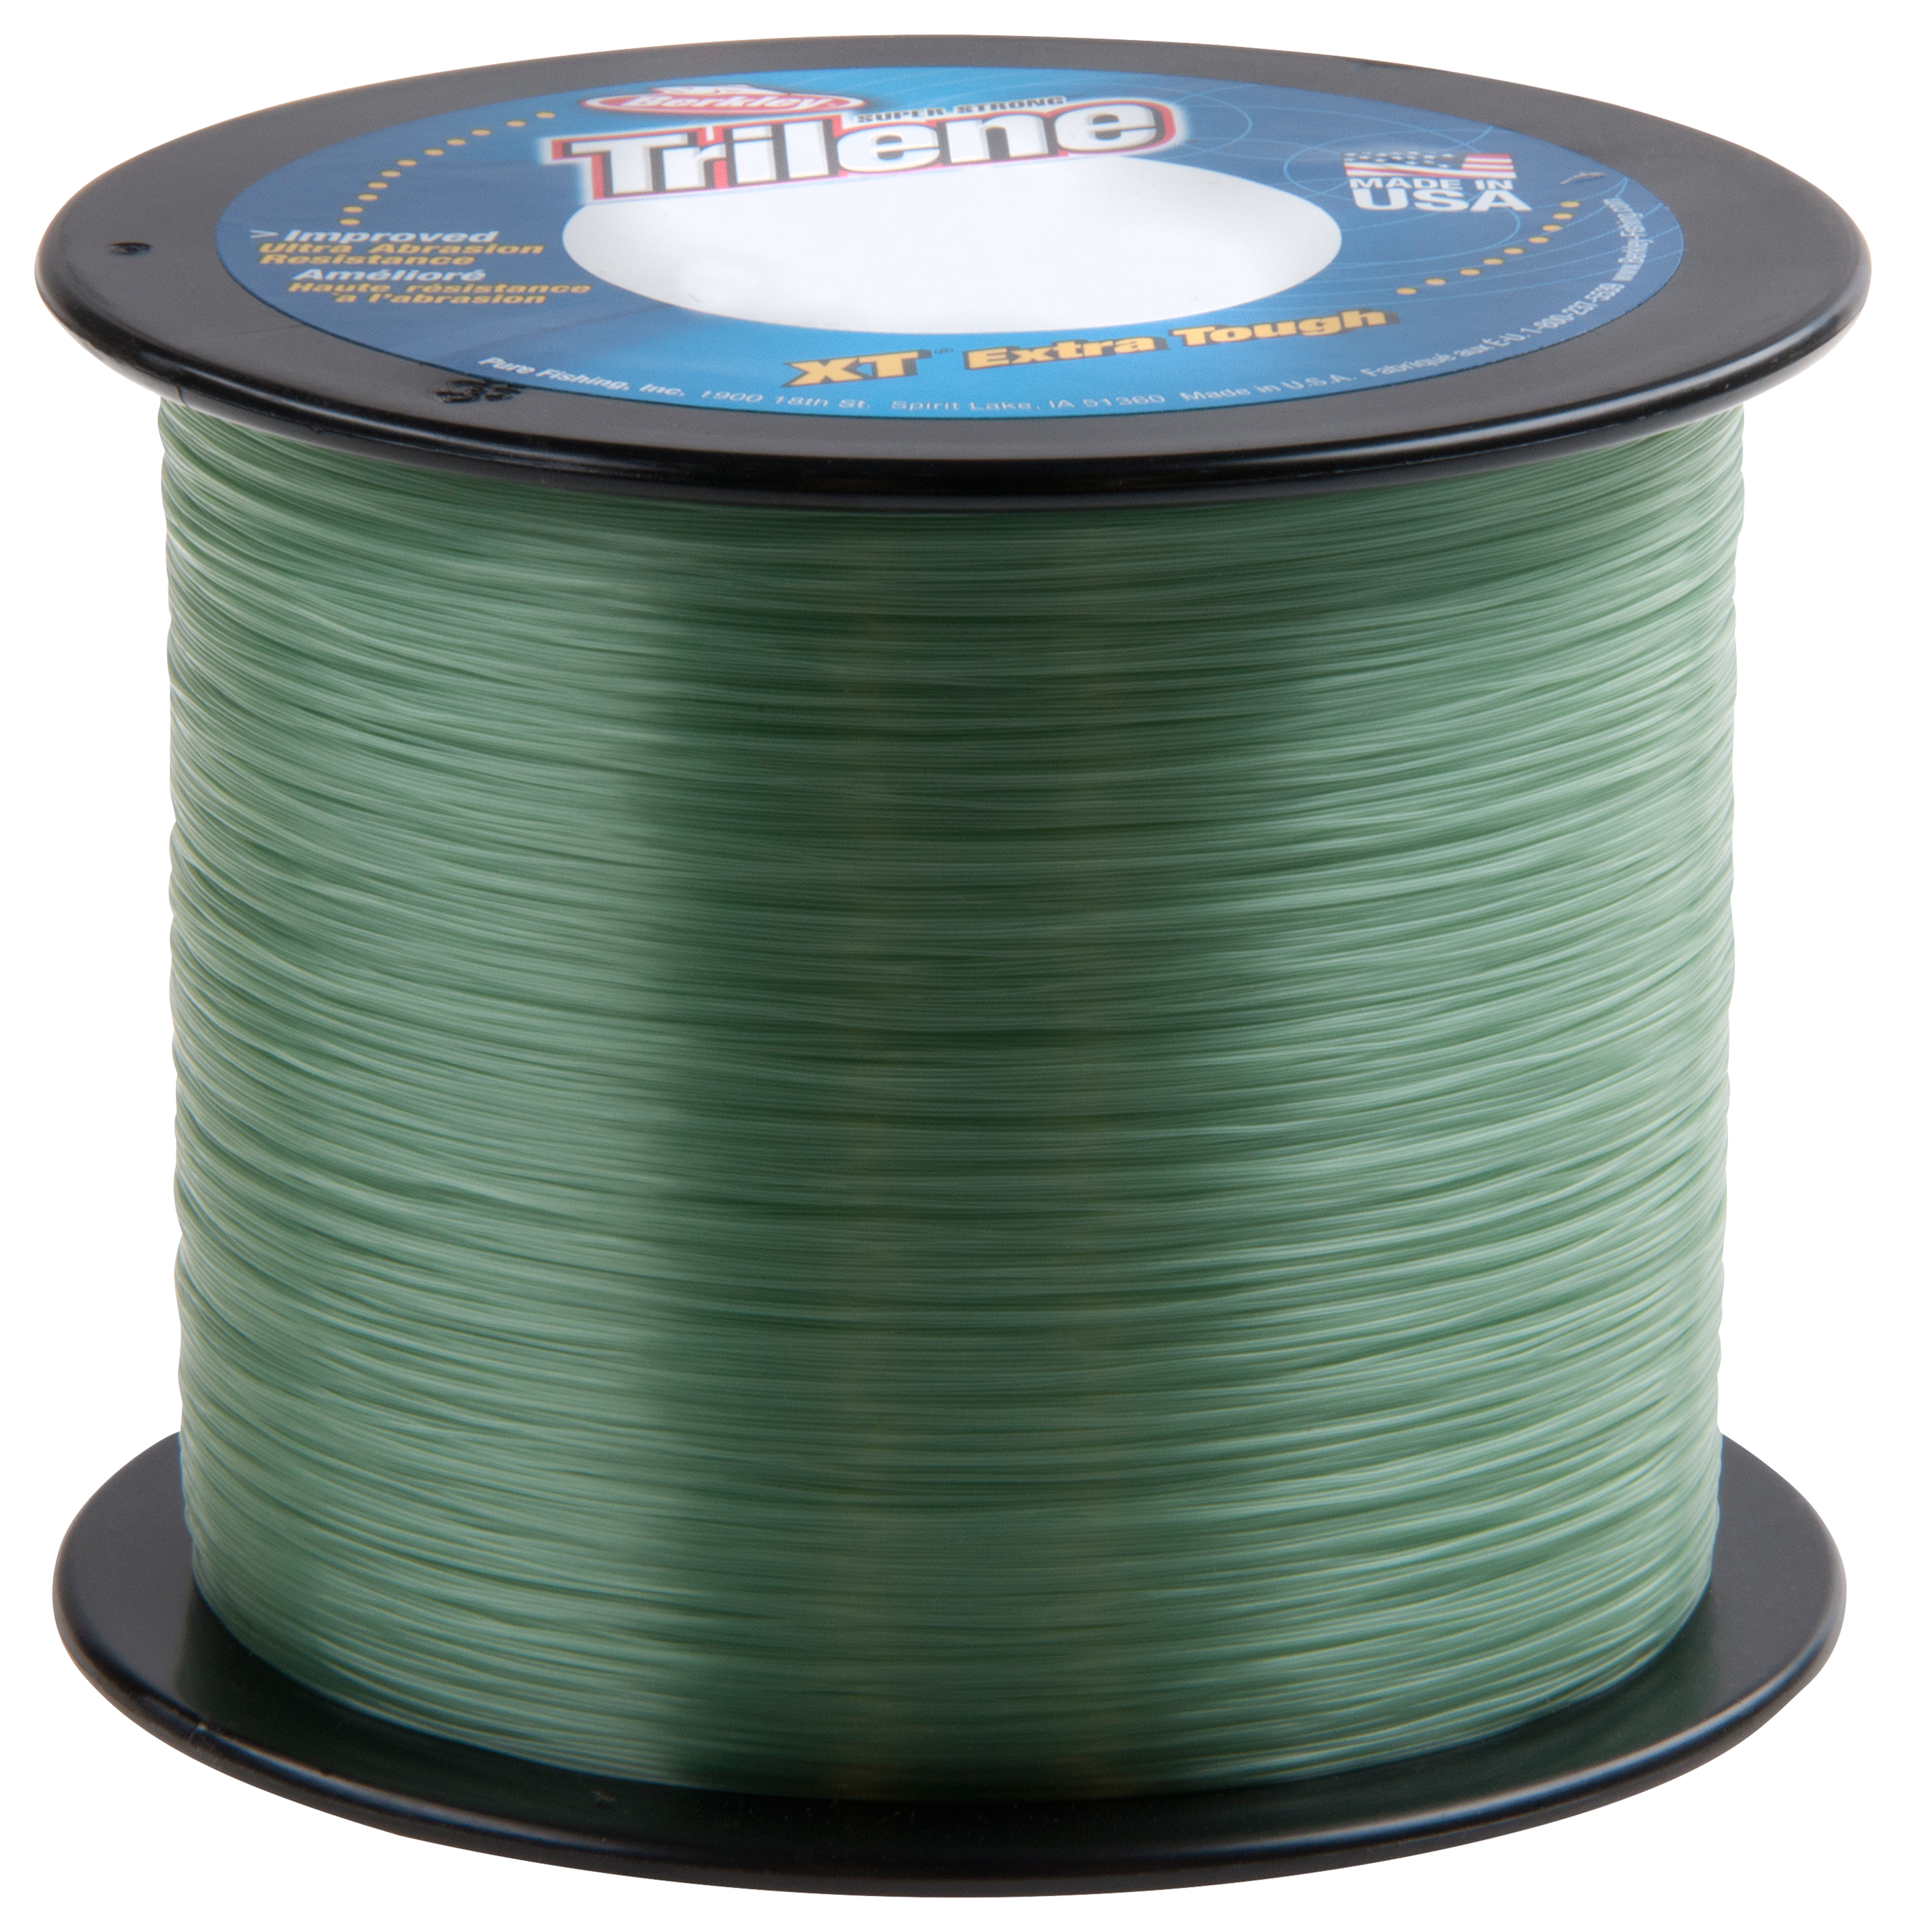 Fishing Line / String Spooling _ Bass Pro Shops - Extreme